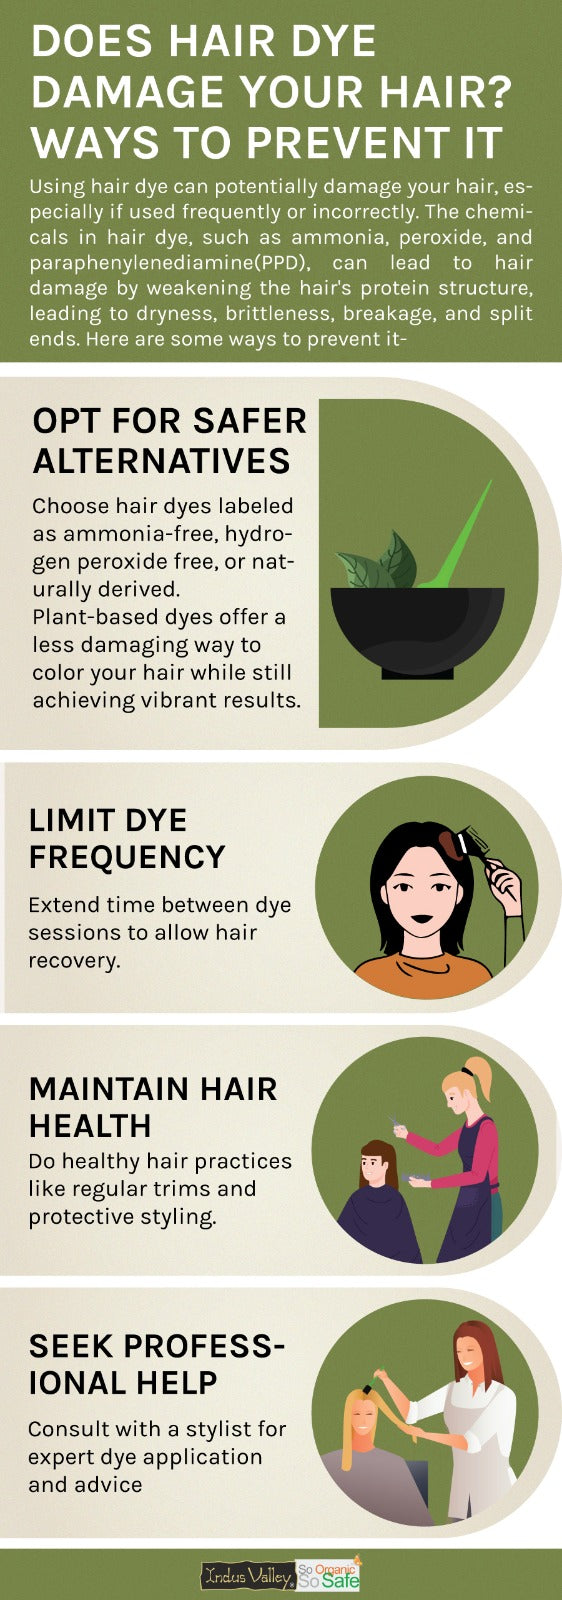 Does Hair Dye Damage Your Hair? Ways to Prevent It